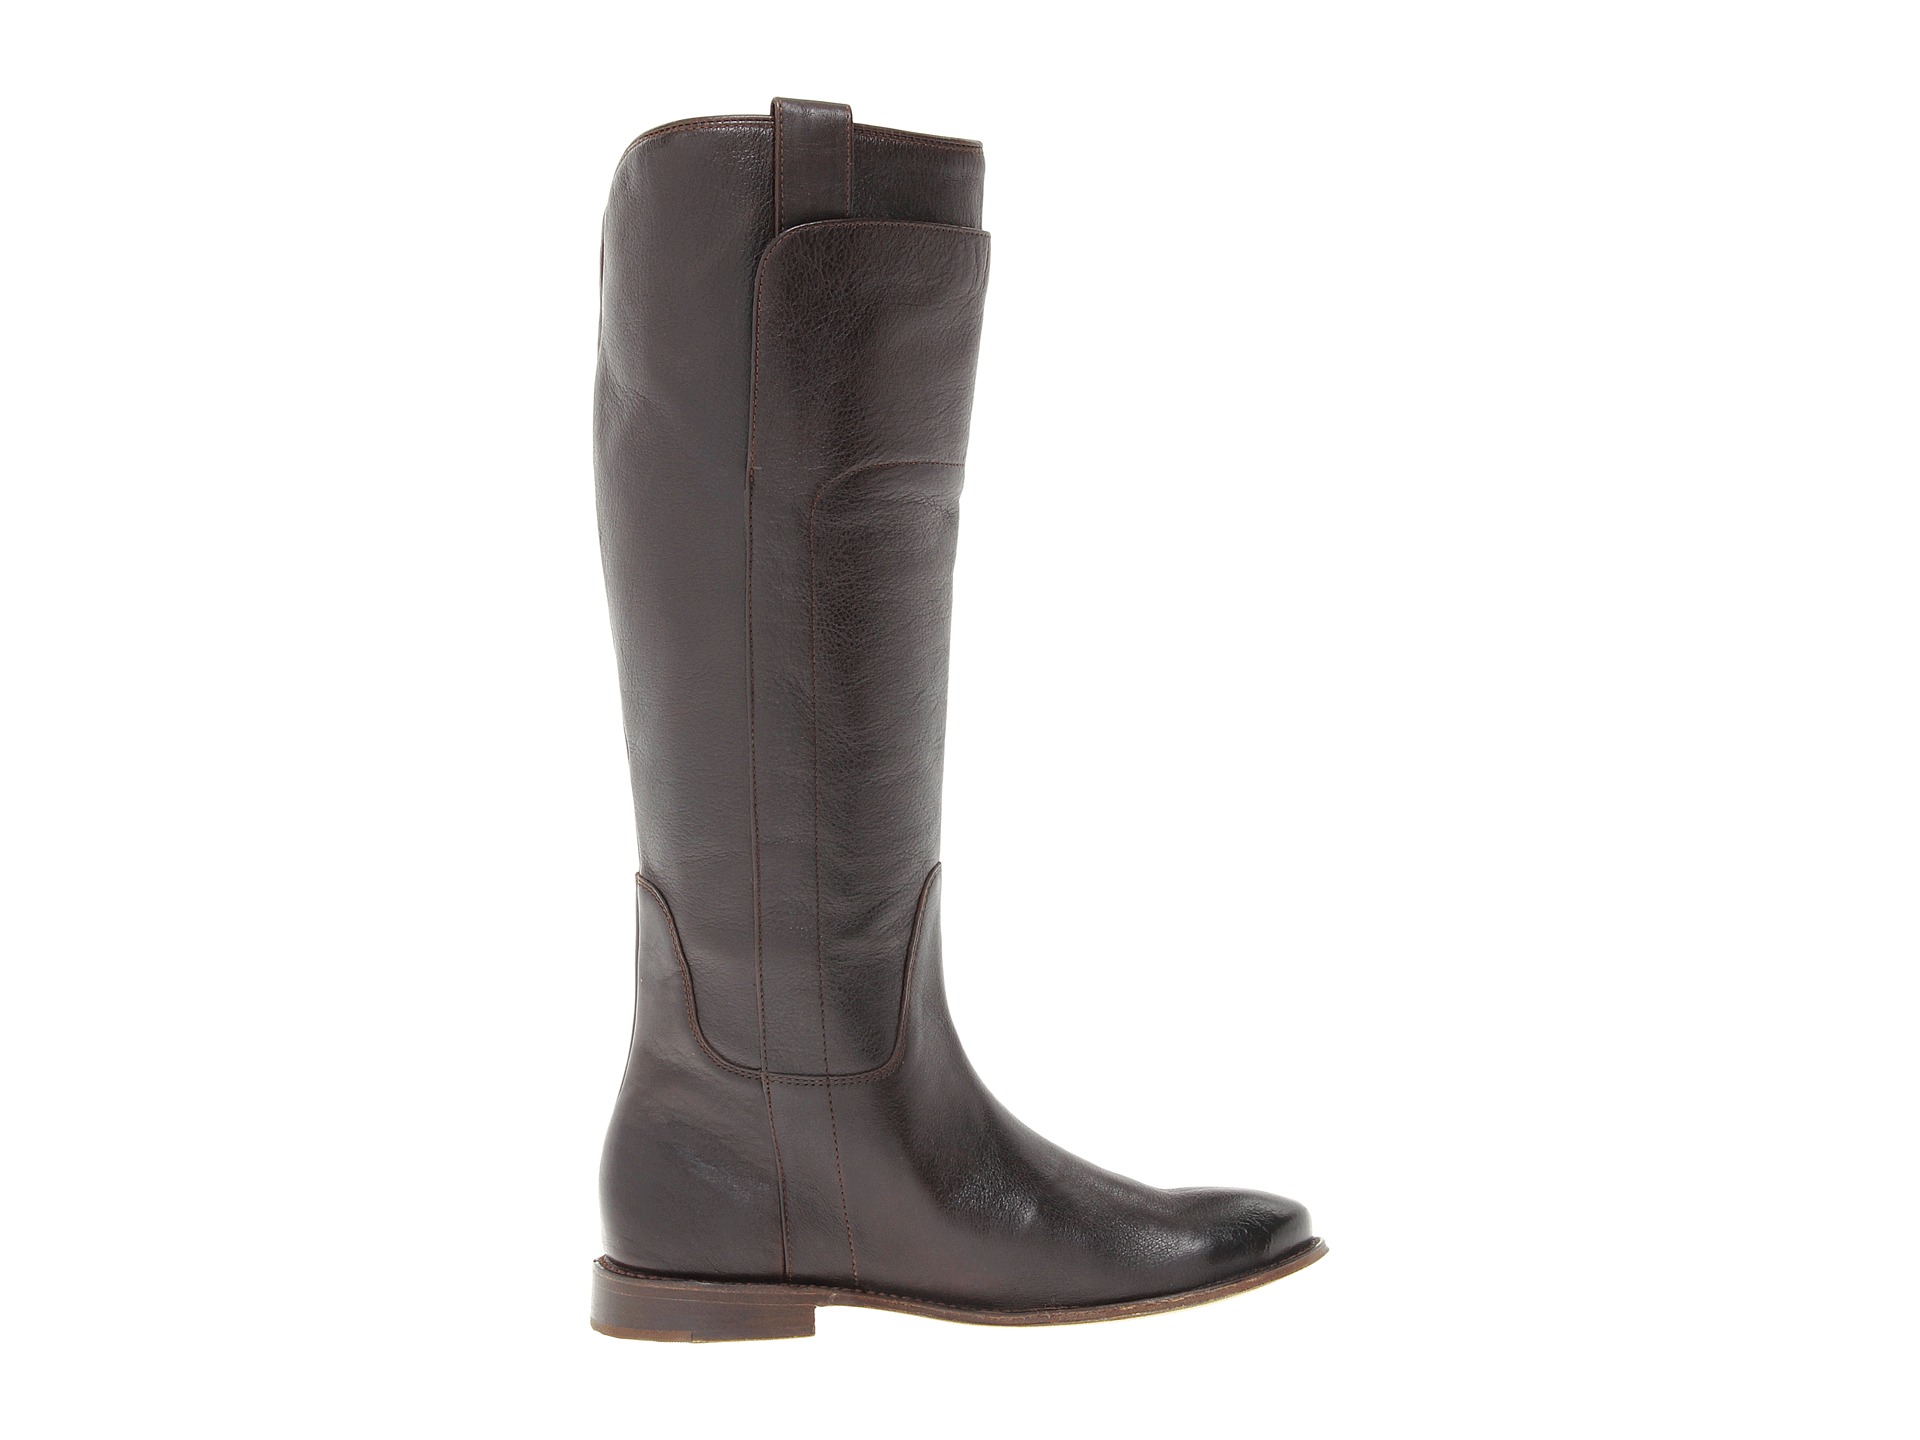 Frye Paige Tall Riding - Zappos.com Free Shipping BOTH Ways